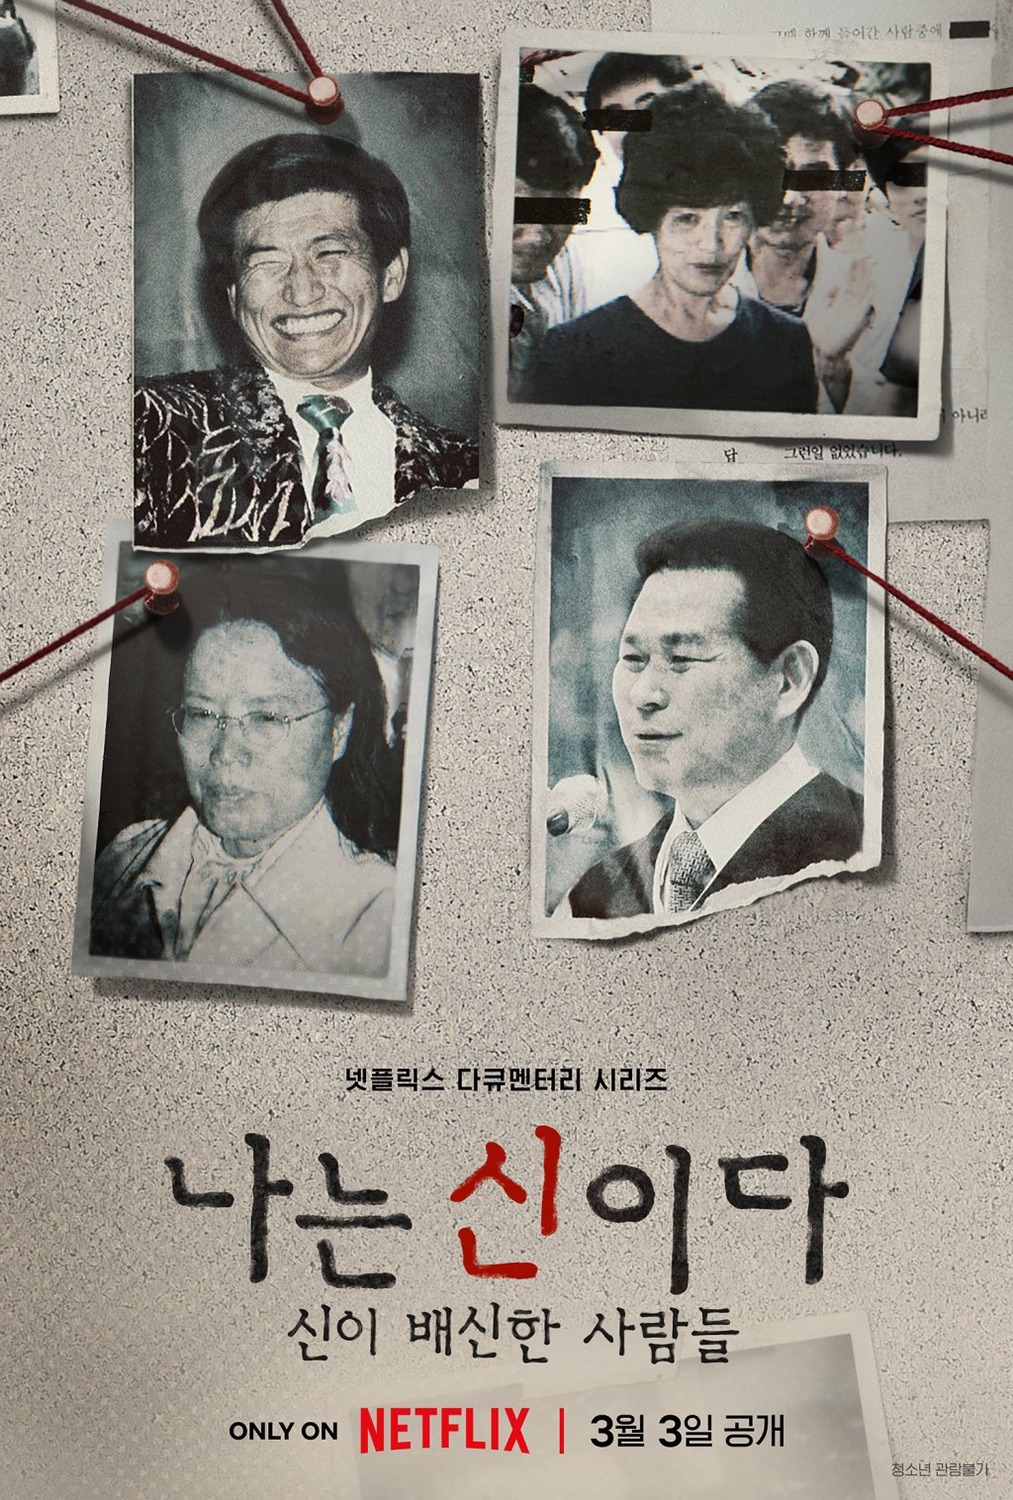 Extra Large TV Poster Image for In the Name of God: A Holy Betrayal 